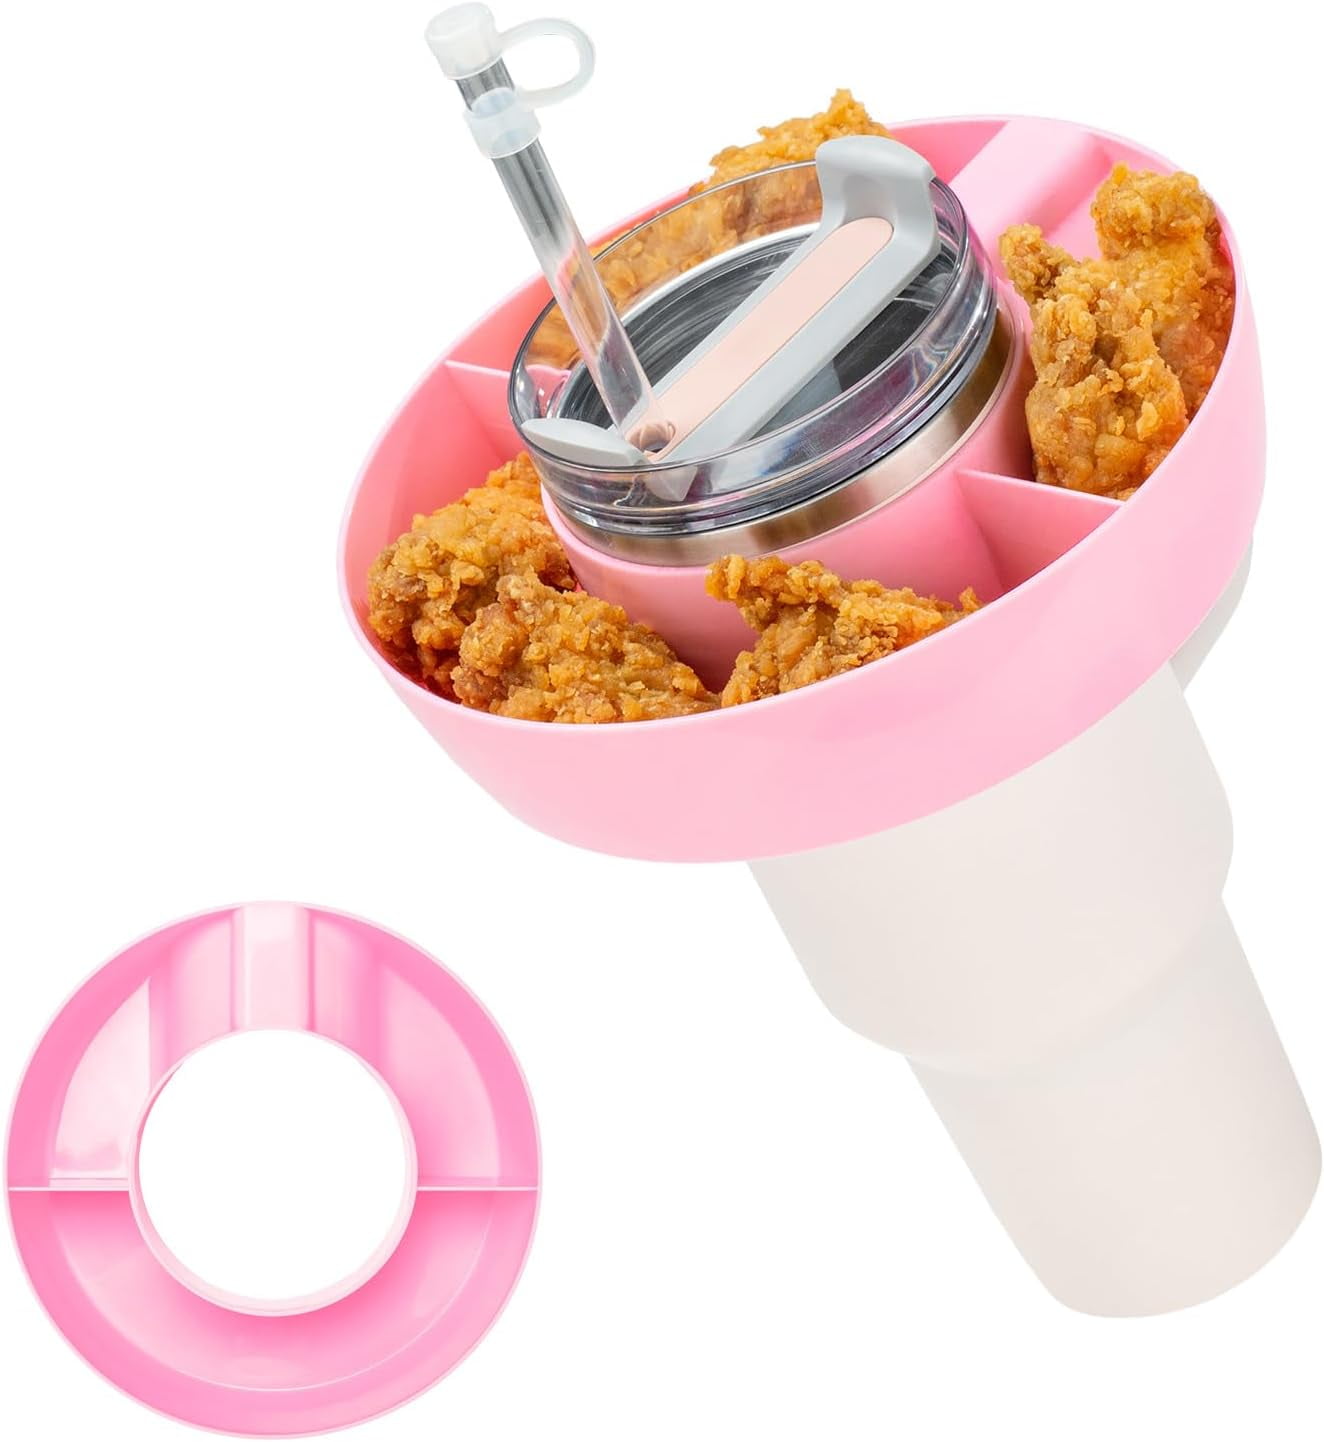 1pc Compatible With Stanley 40oz Insulated Cup Snack Plate Water